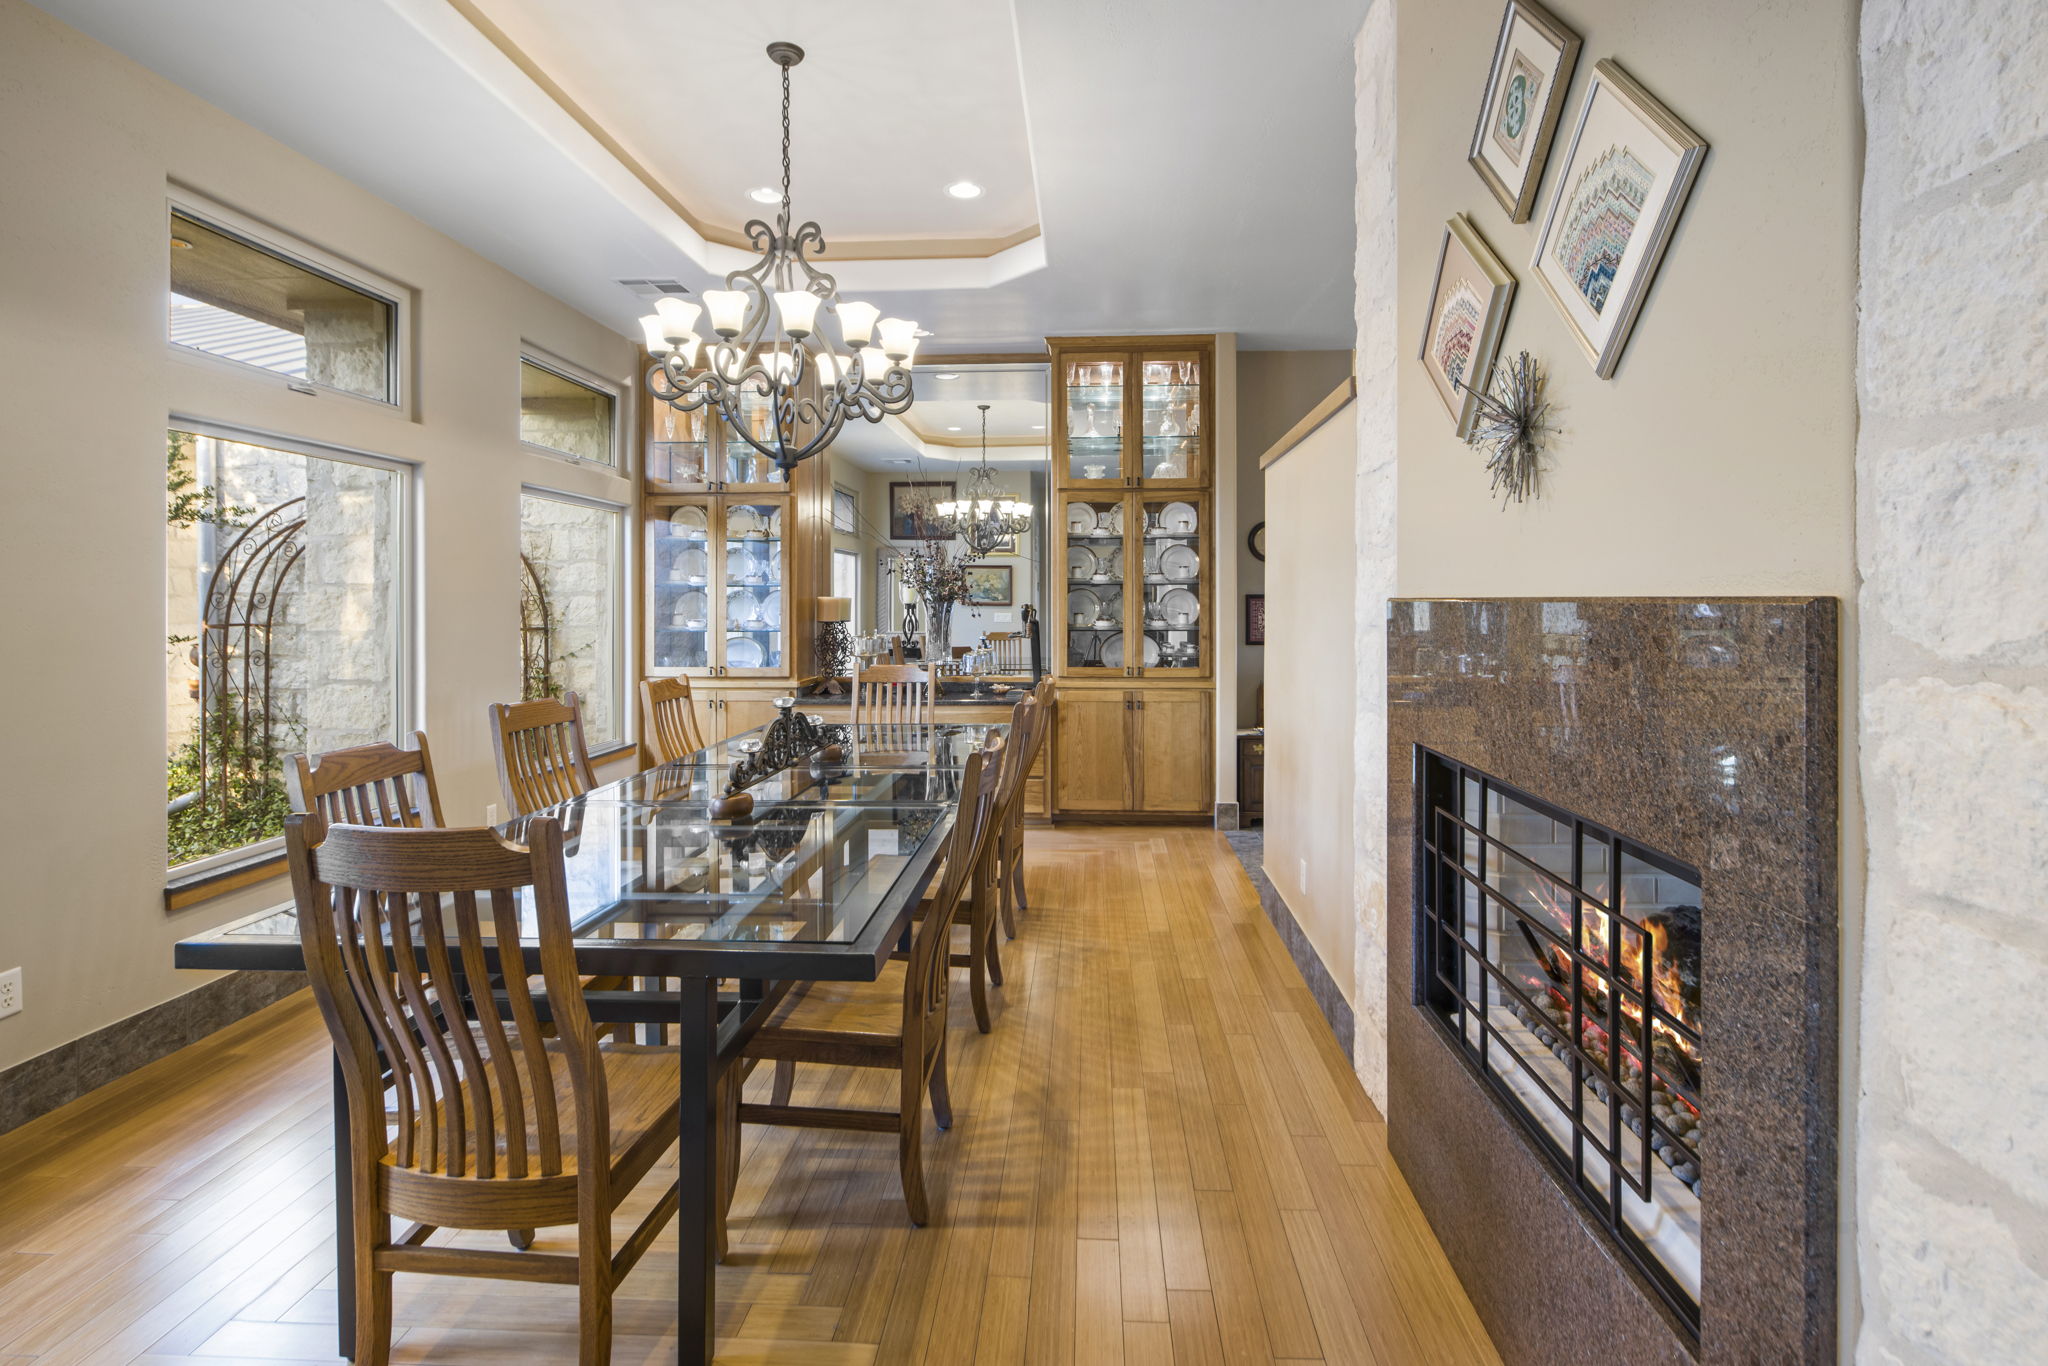 Formal Dinning with built inns and fire place